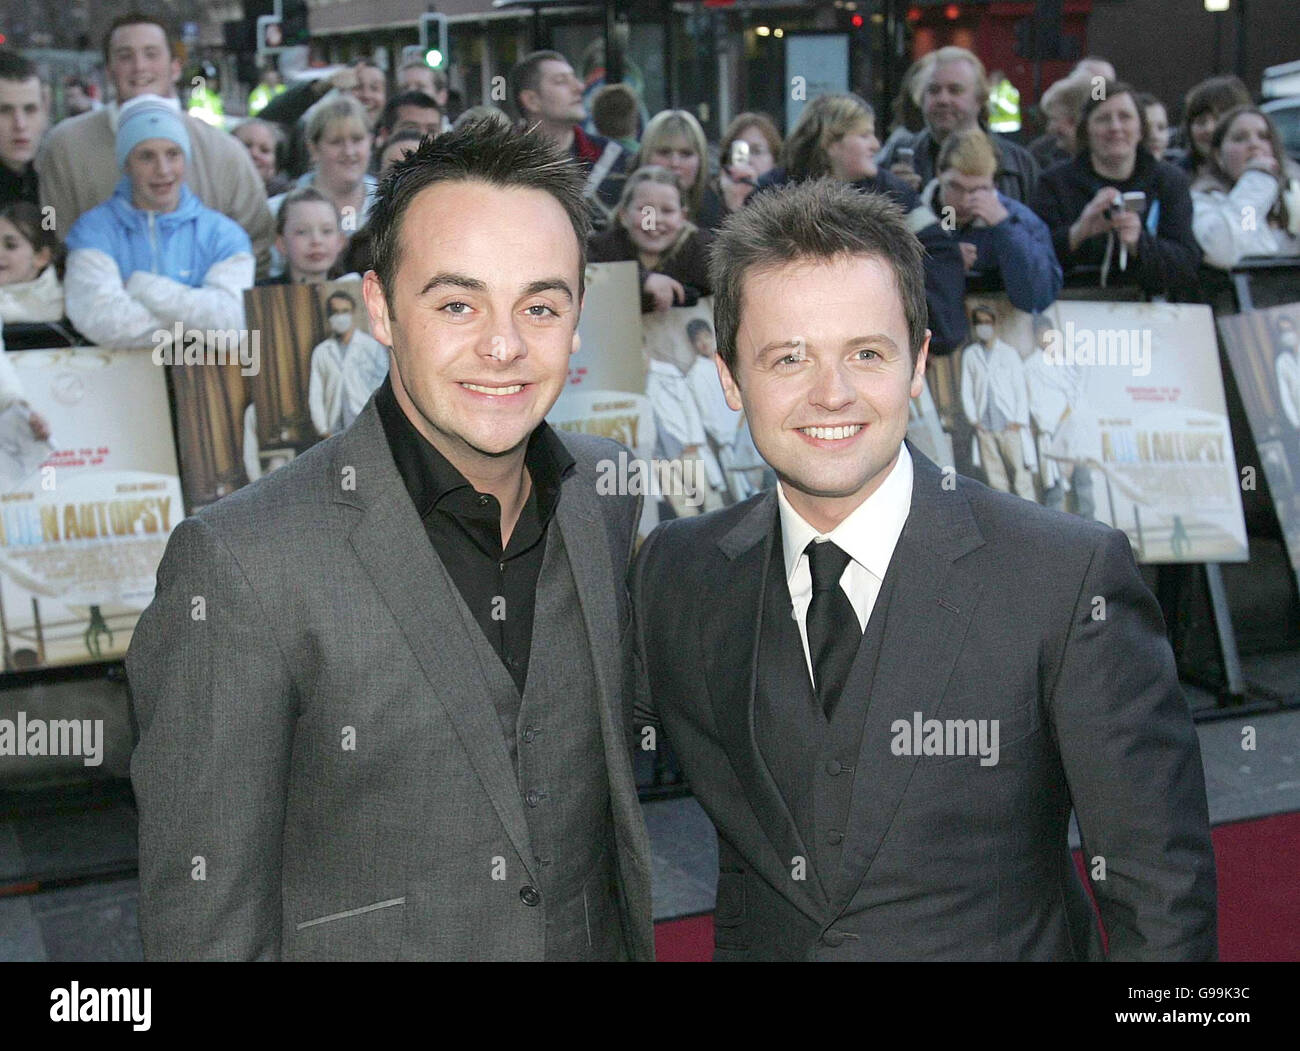 Newcastle born duo Ant and Dec arrive at the Gate Cinema, in Newcastle, Tuesday 4th april 2006, for the northern premiere of their new film Allien Autopsy. See PA story SHOWBIZ AntDec. PRESS ASSOCIATION PHOTO. Picture credit should read: Owen Humphreys/PA Stock Photo